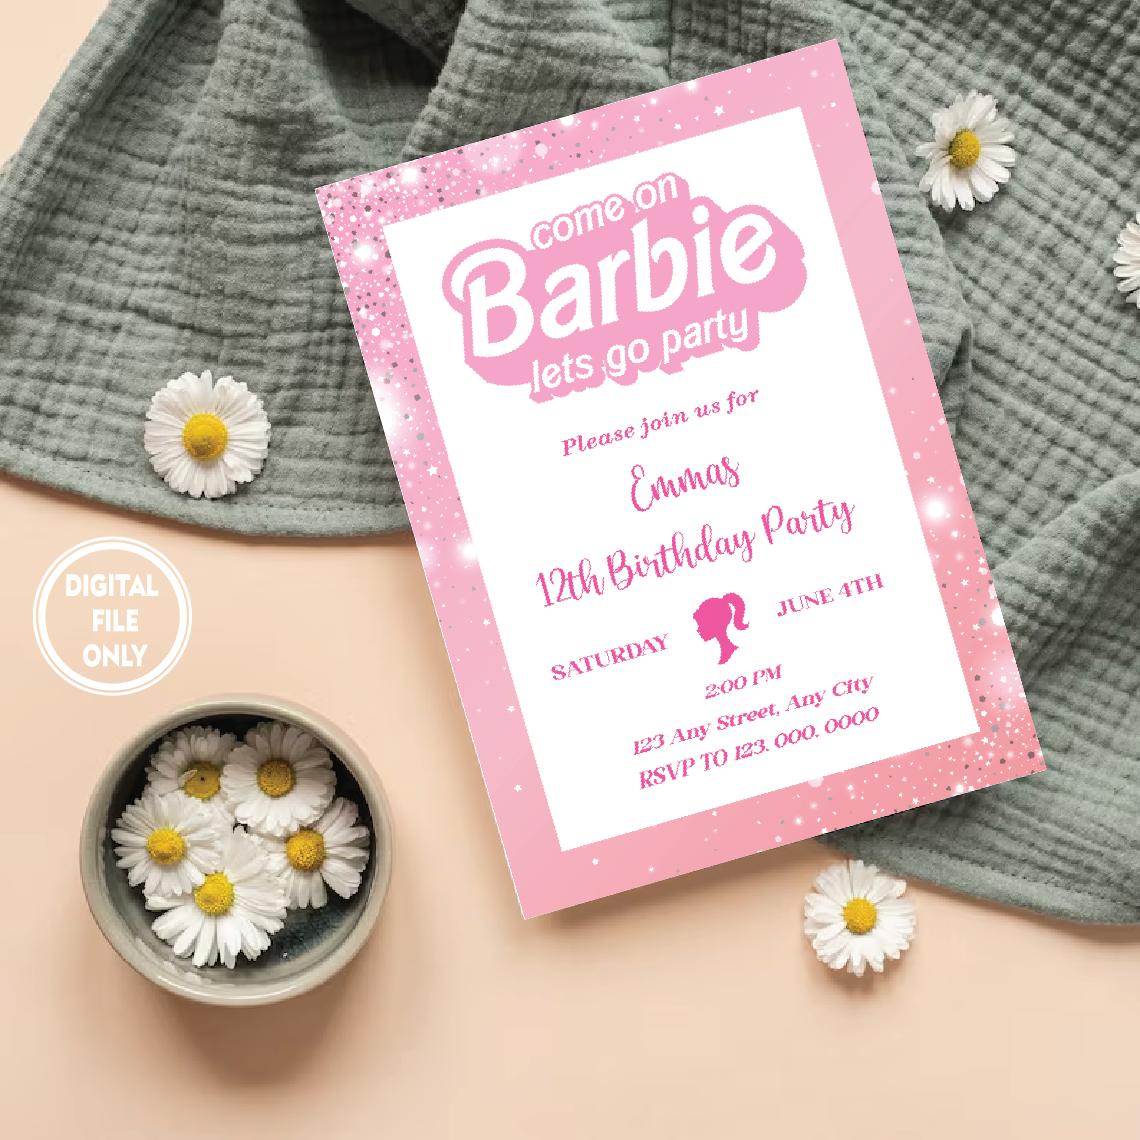 Personalized File Doll Party Invitation, Doll Birthday Party, Hot Pink Birthday Party Invitation, Pink Doll Birthday Invitation, Doll Invitation, PNG File Only